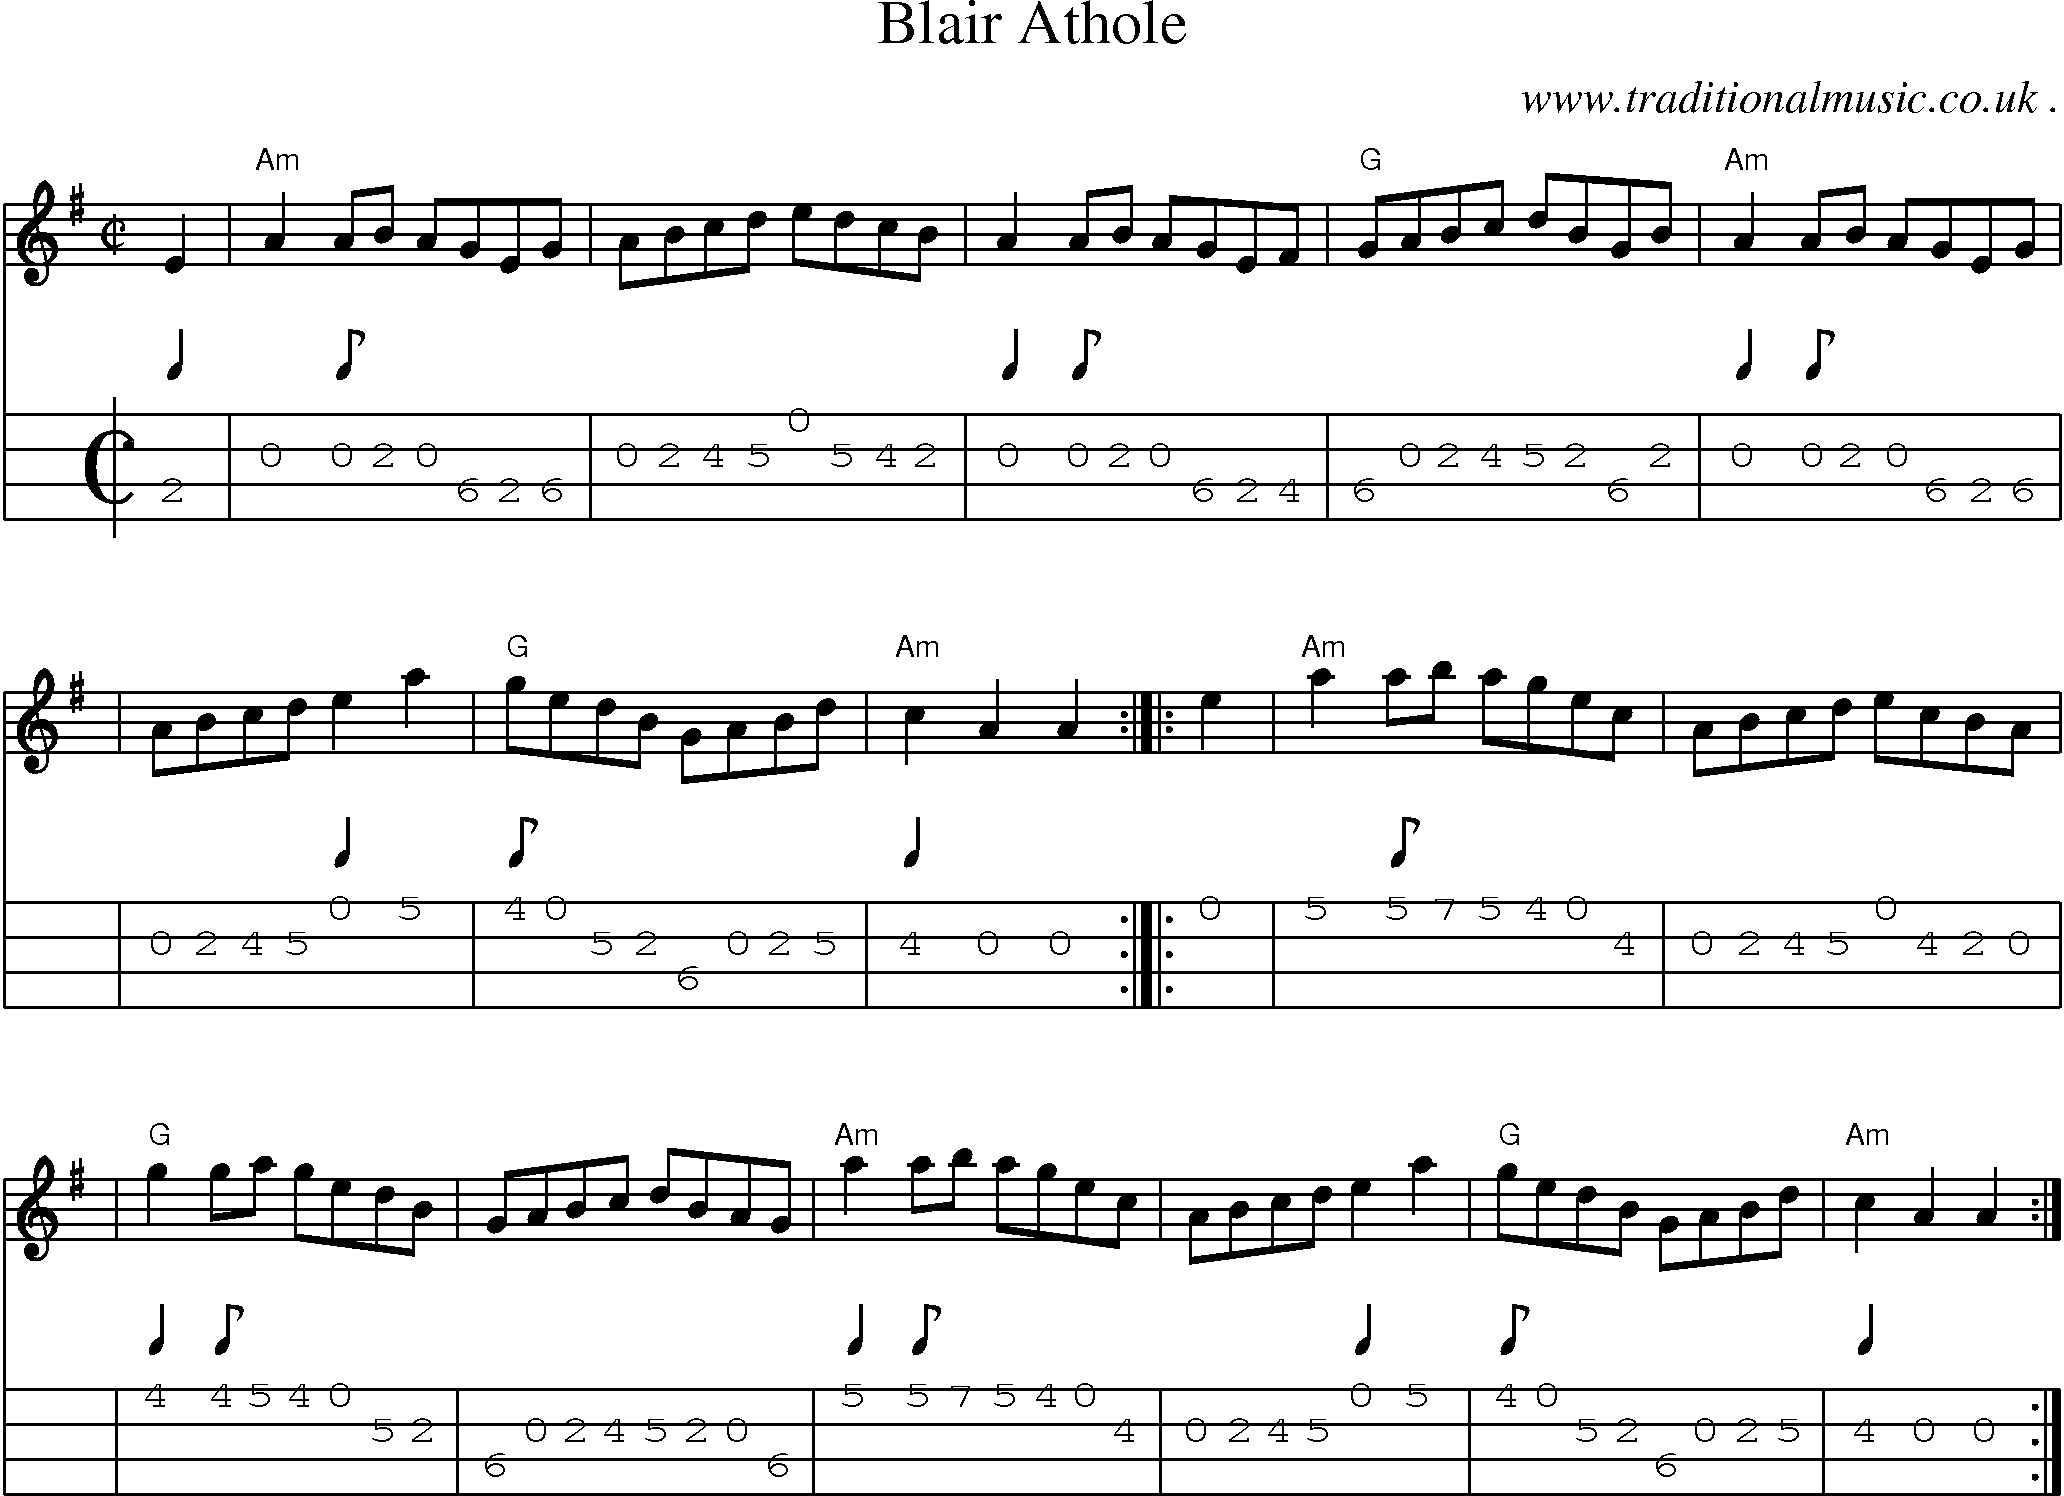 Sheet-music  score, Chords and Mandolin Tabs for Blair Athole